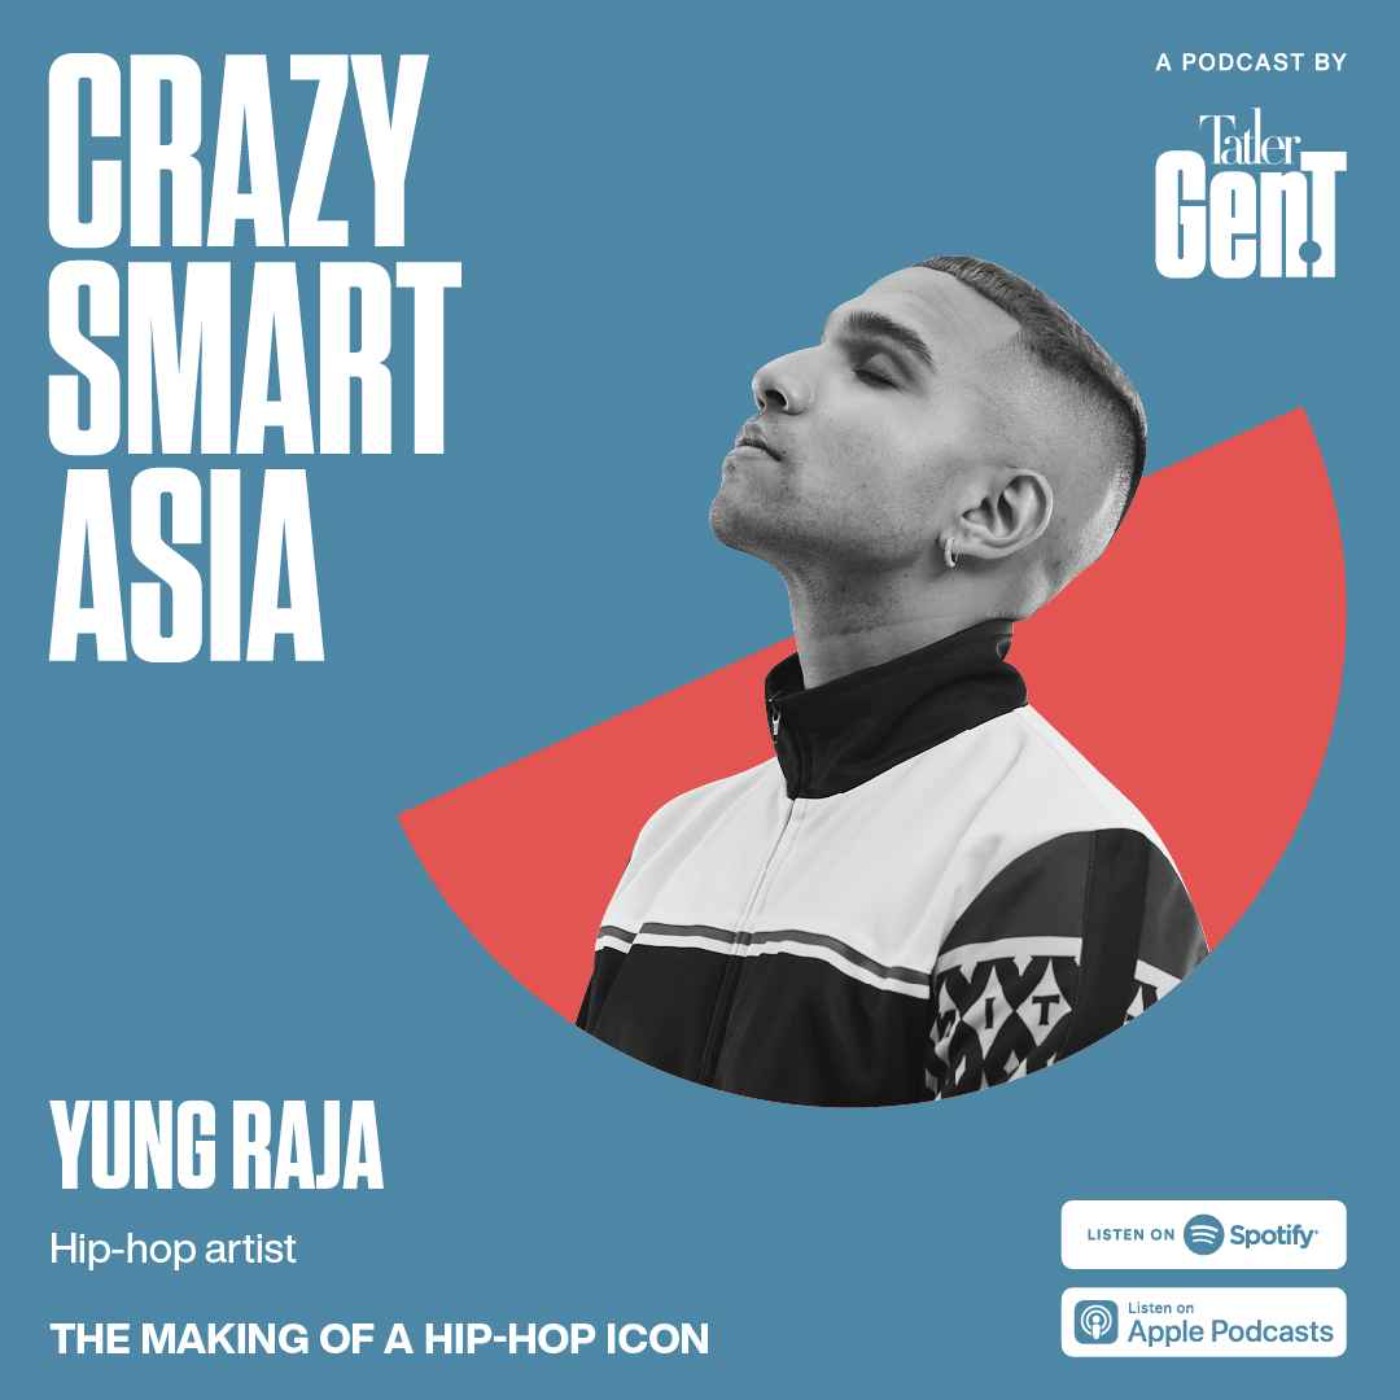 The making of an Asian hip-hop icon, with Singaporean rapper Yung Raja